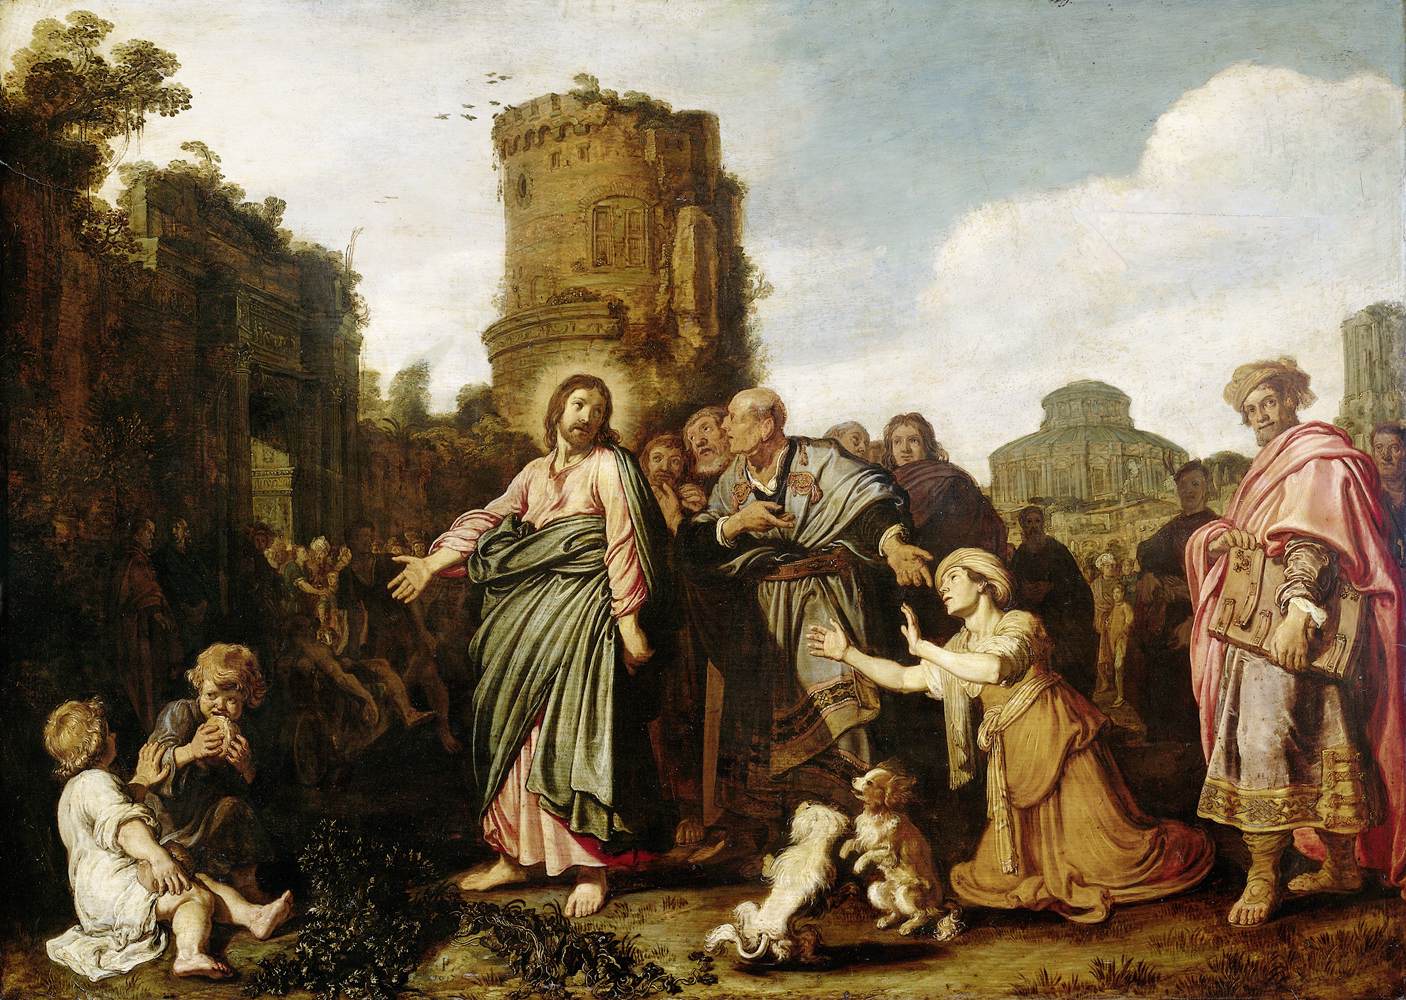 Christ and the Woman of Canaan by Pieter Lastman - 1617 - 76.8 x 106.6 cm Rembrandthuis